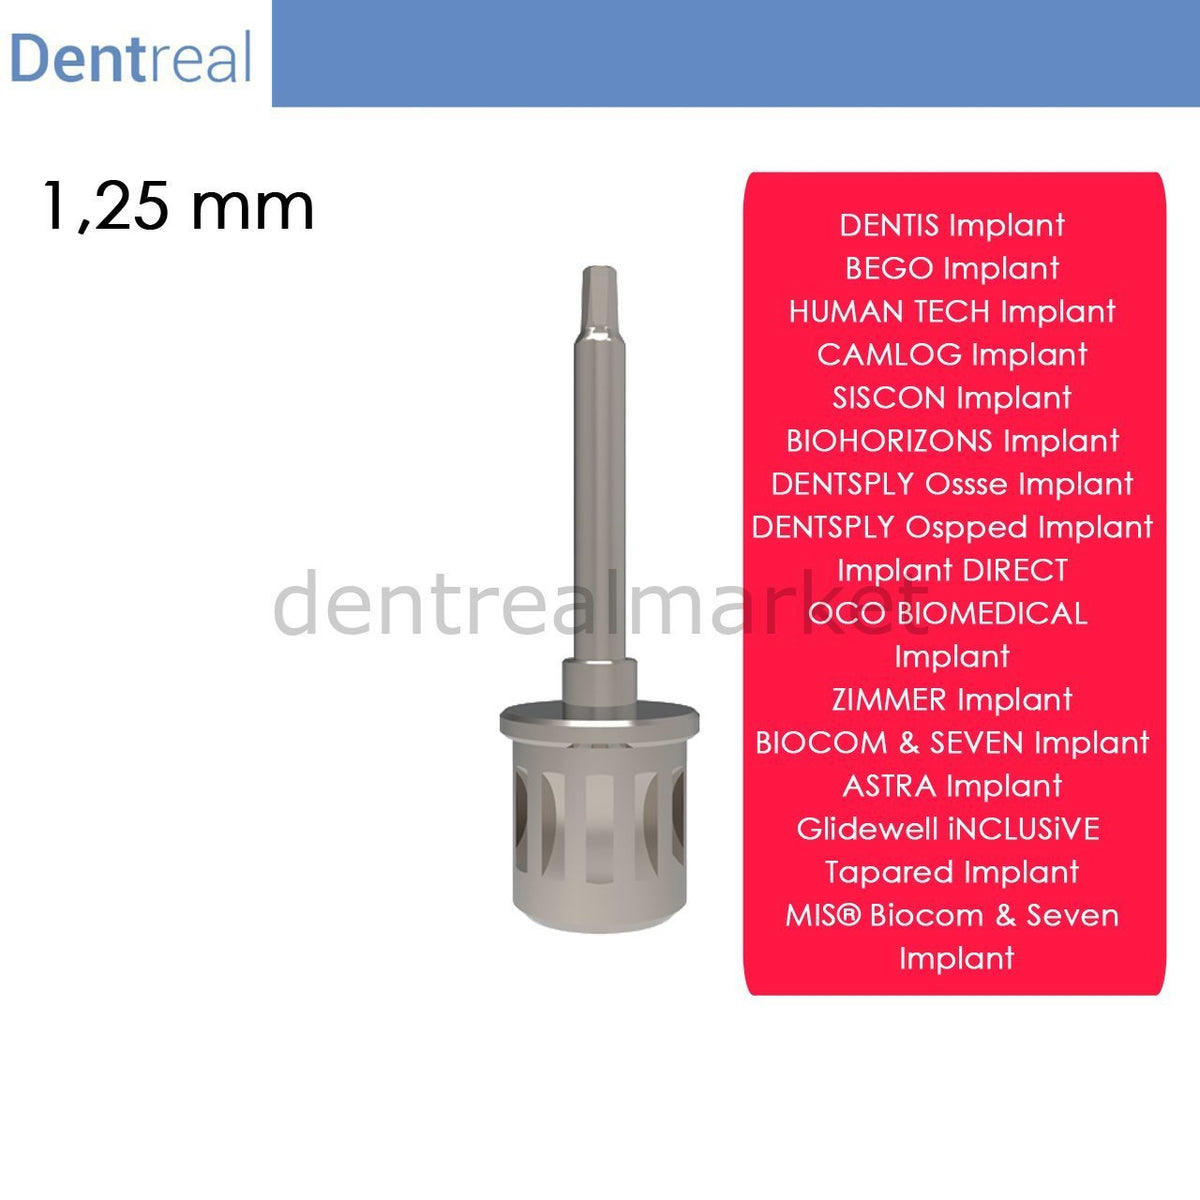 DentrealStore - Dentreal Screwdriver for Implant Direct Implant - 1,25 mm Hex Driver